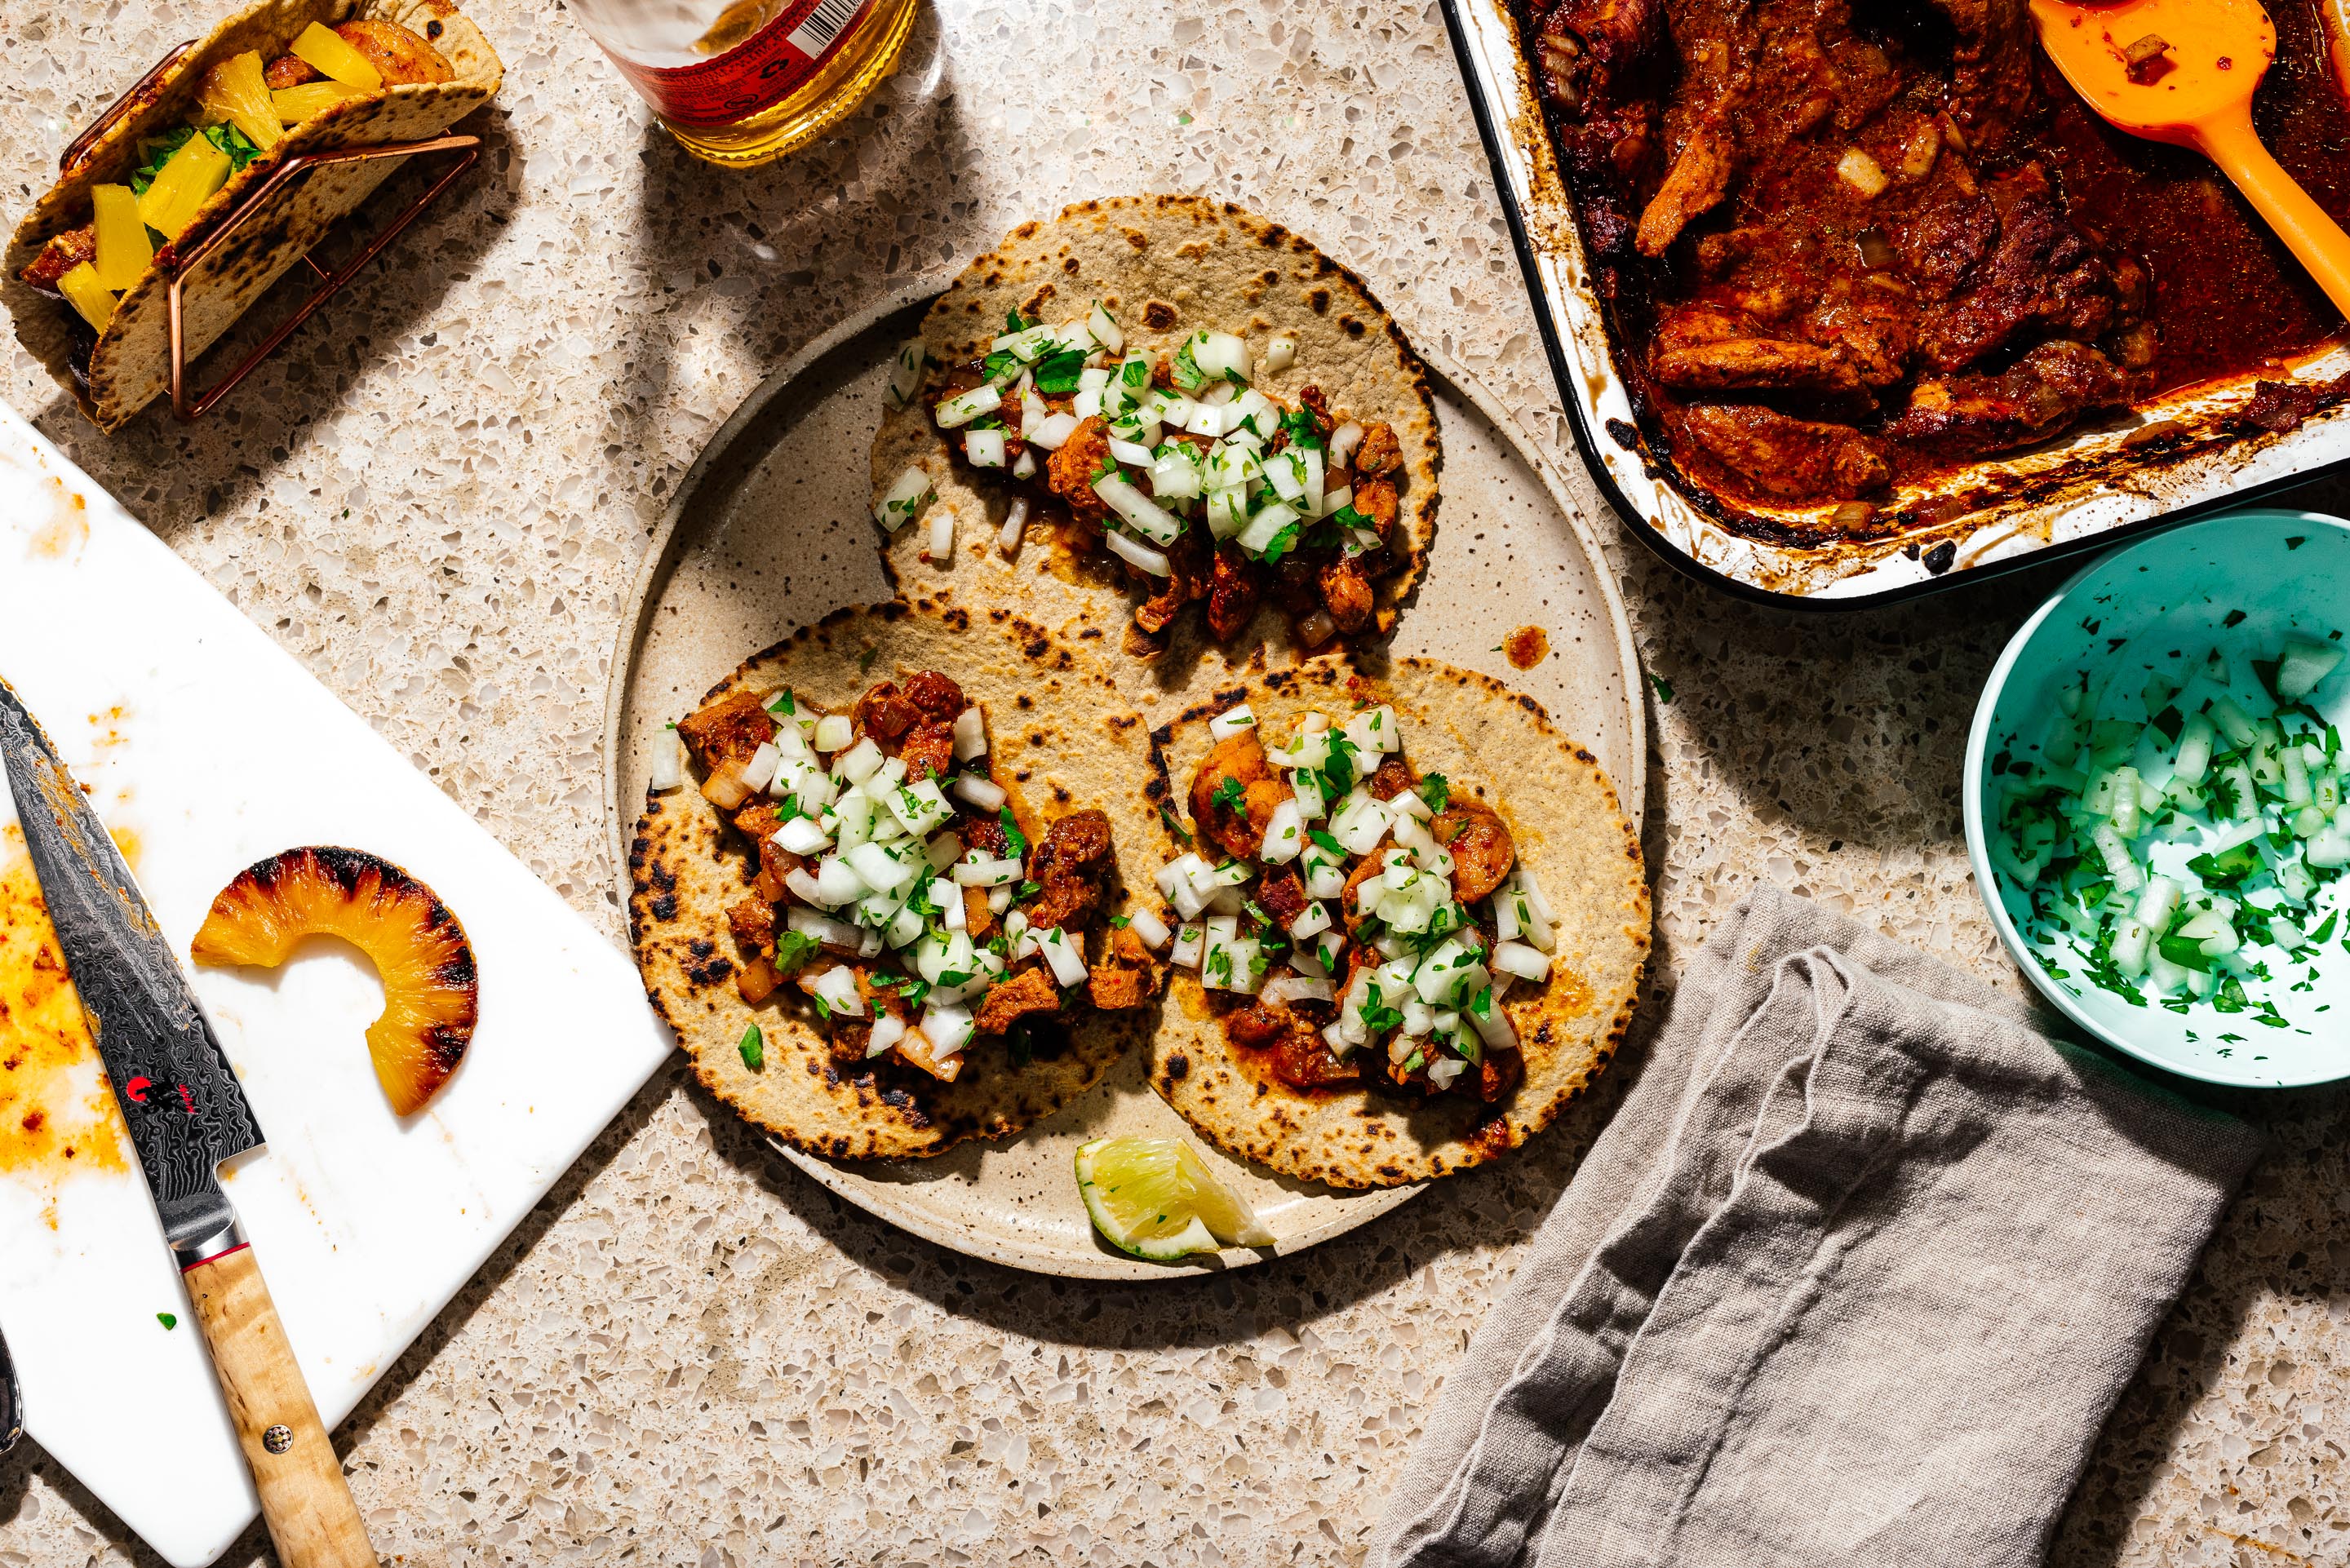 The best taco filling is this oven baked carne adovada pork taco recipe